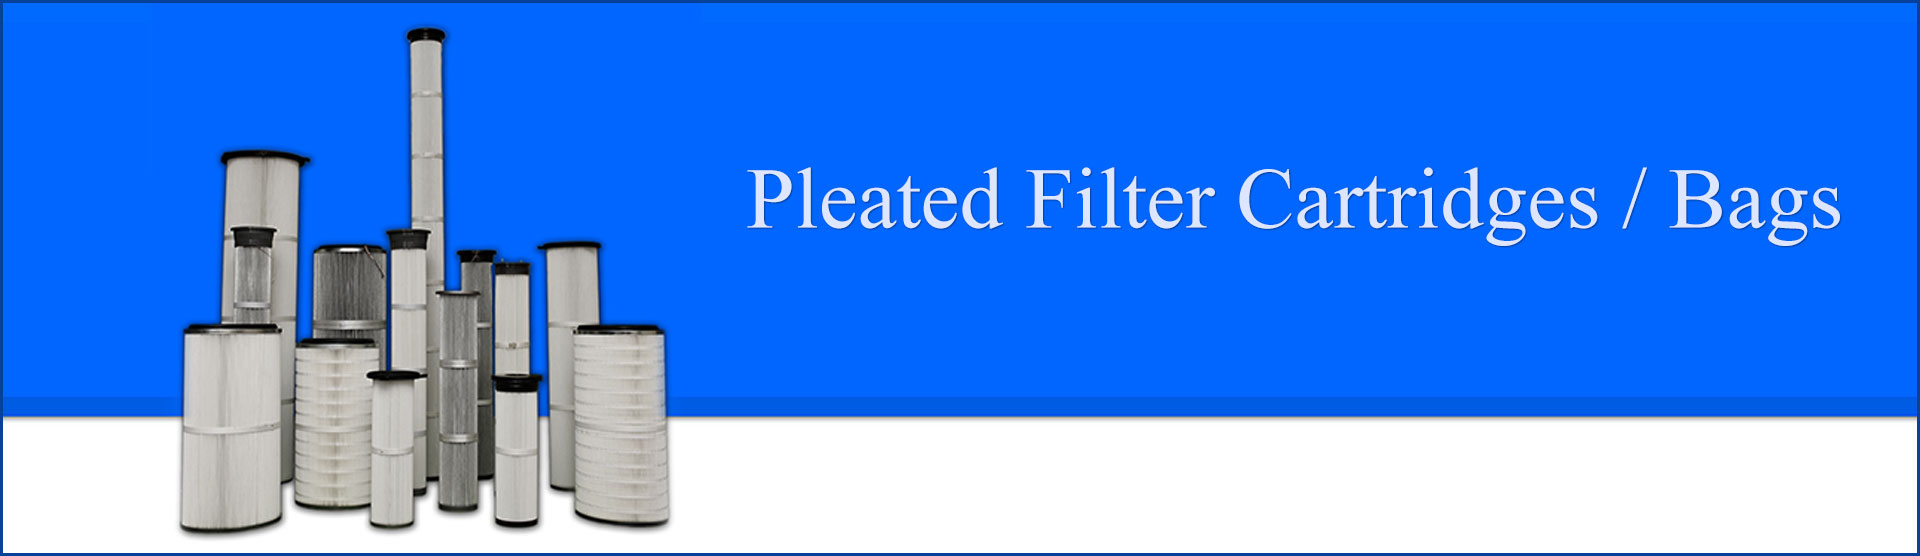 pleated-filter-cartridges-bags